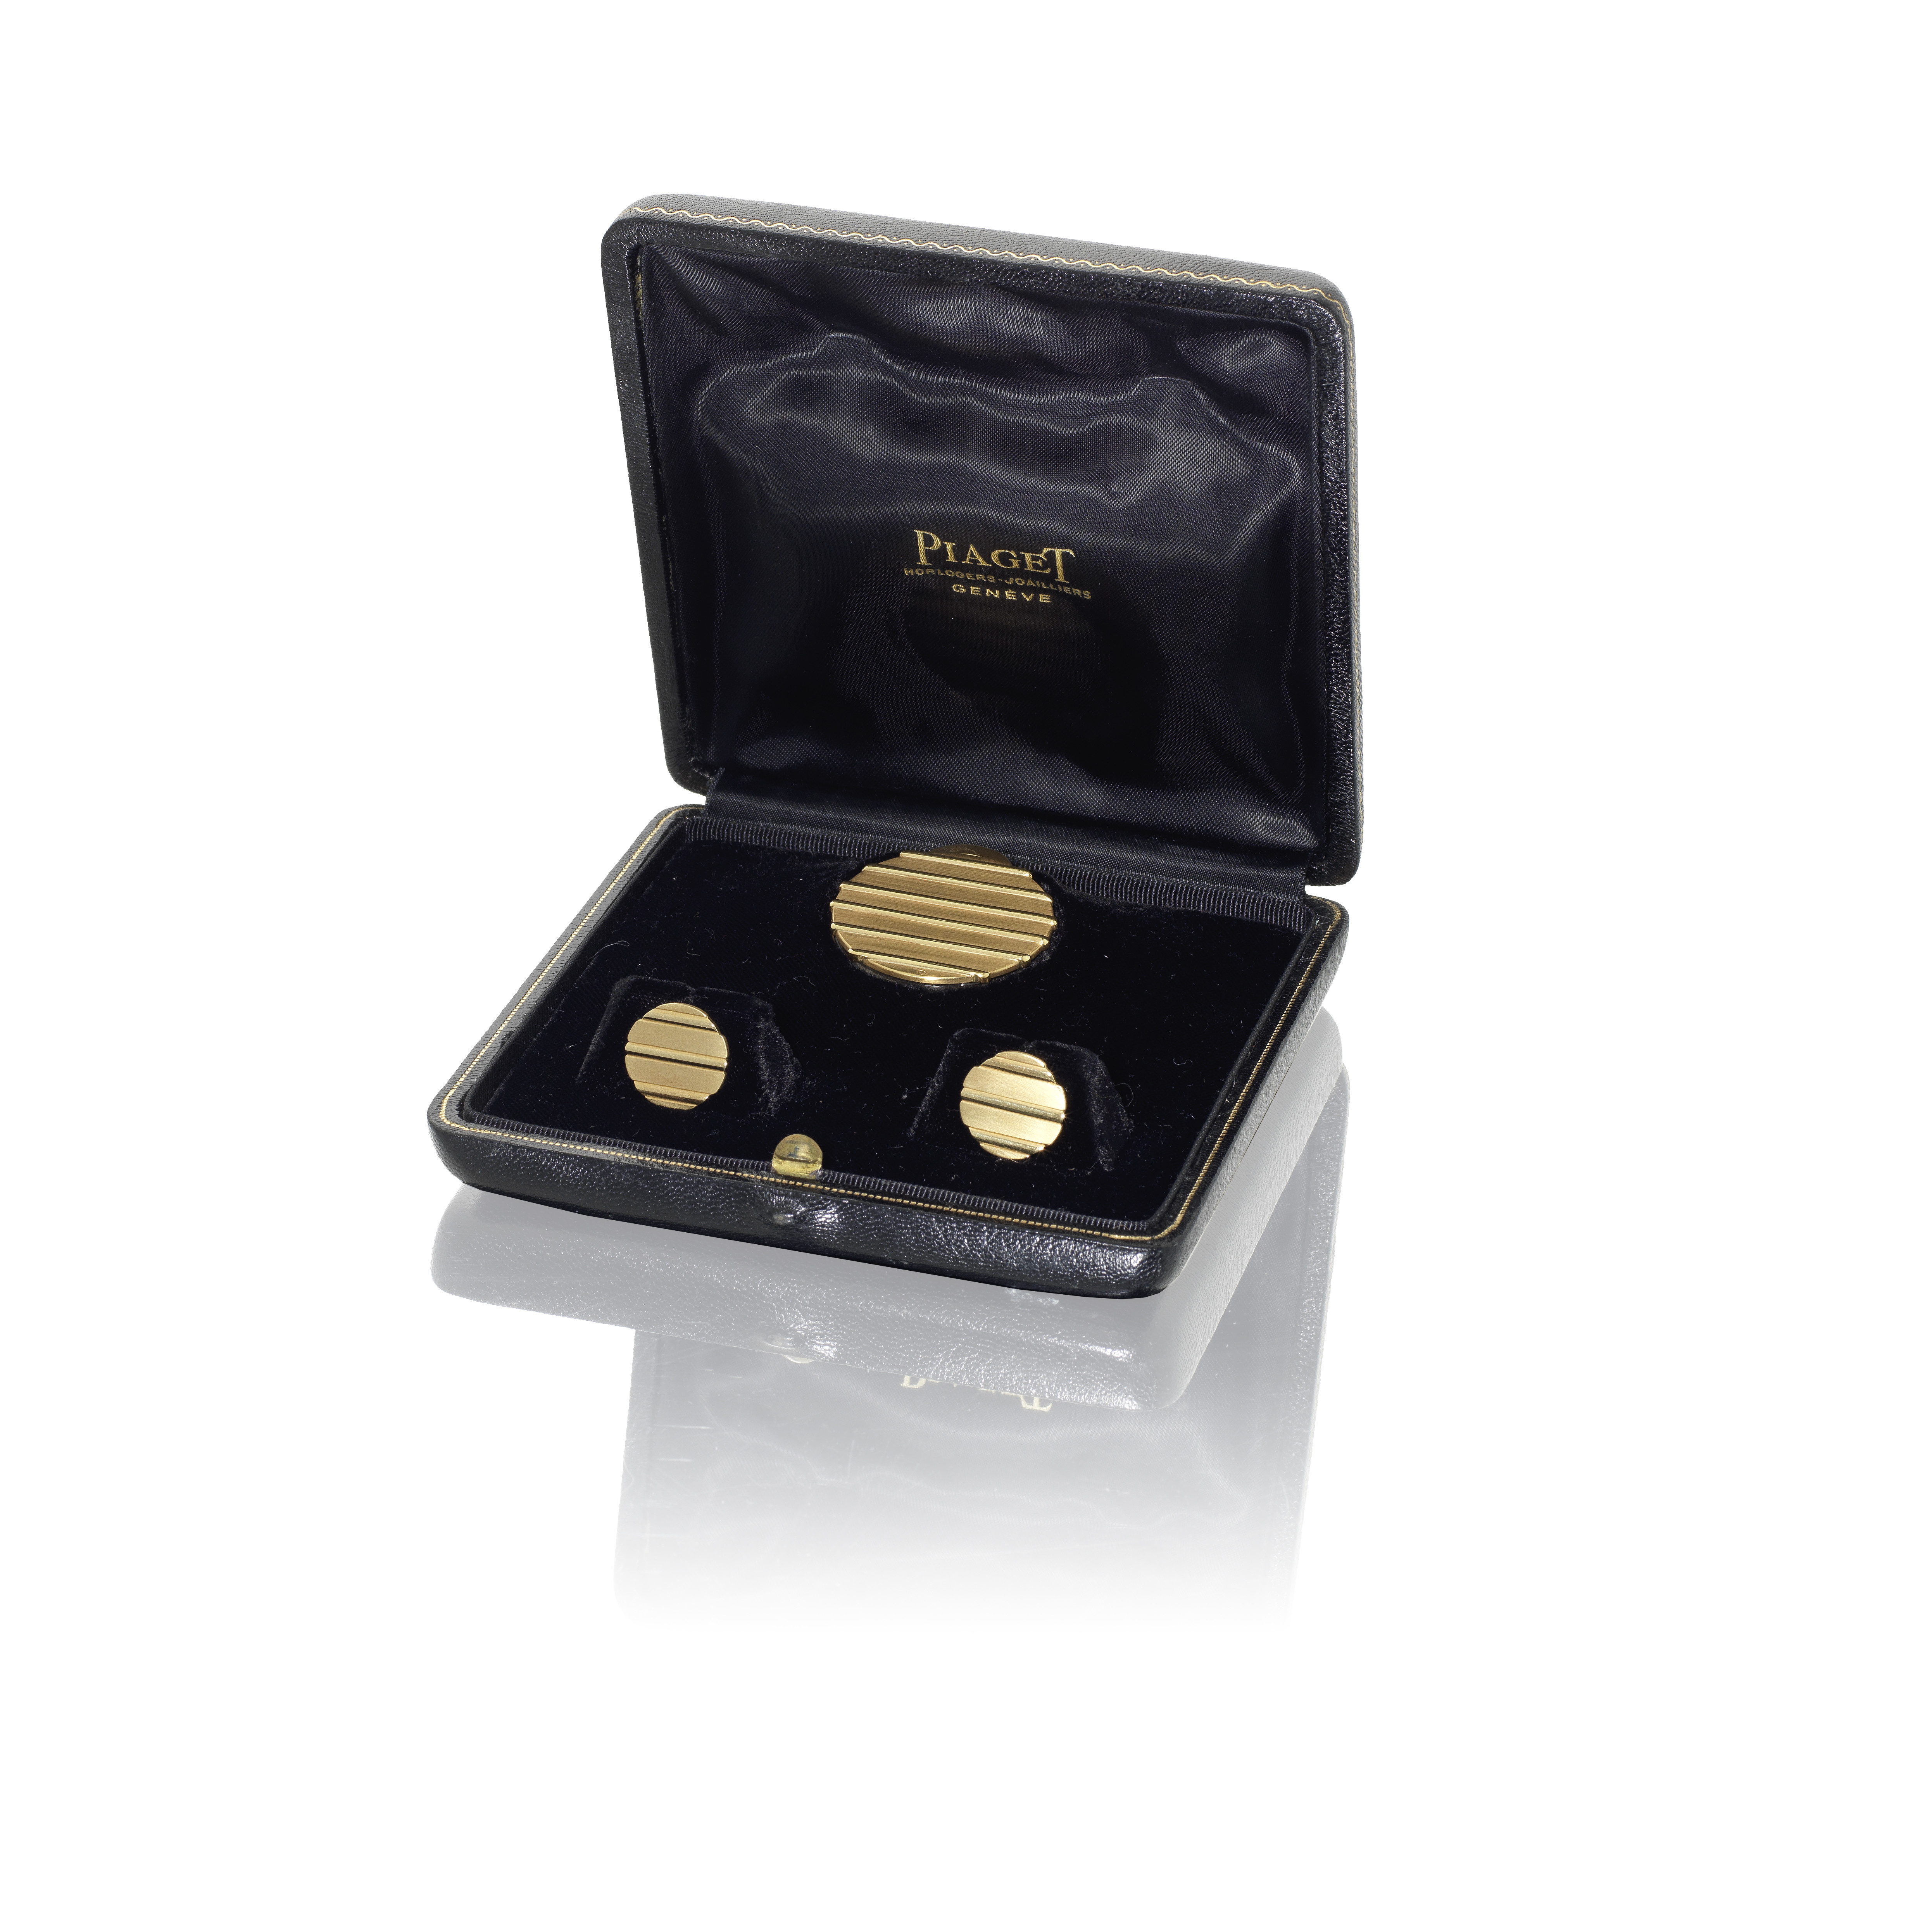 A pair of gold Piaget cufflinks owned by Roger Moore